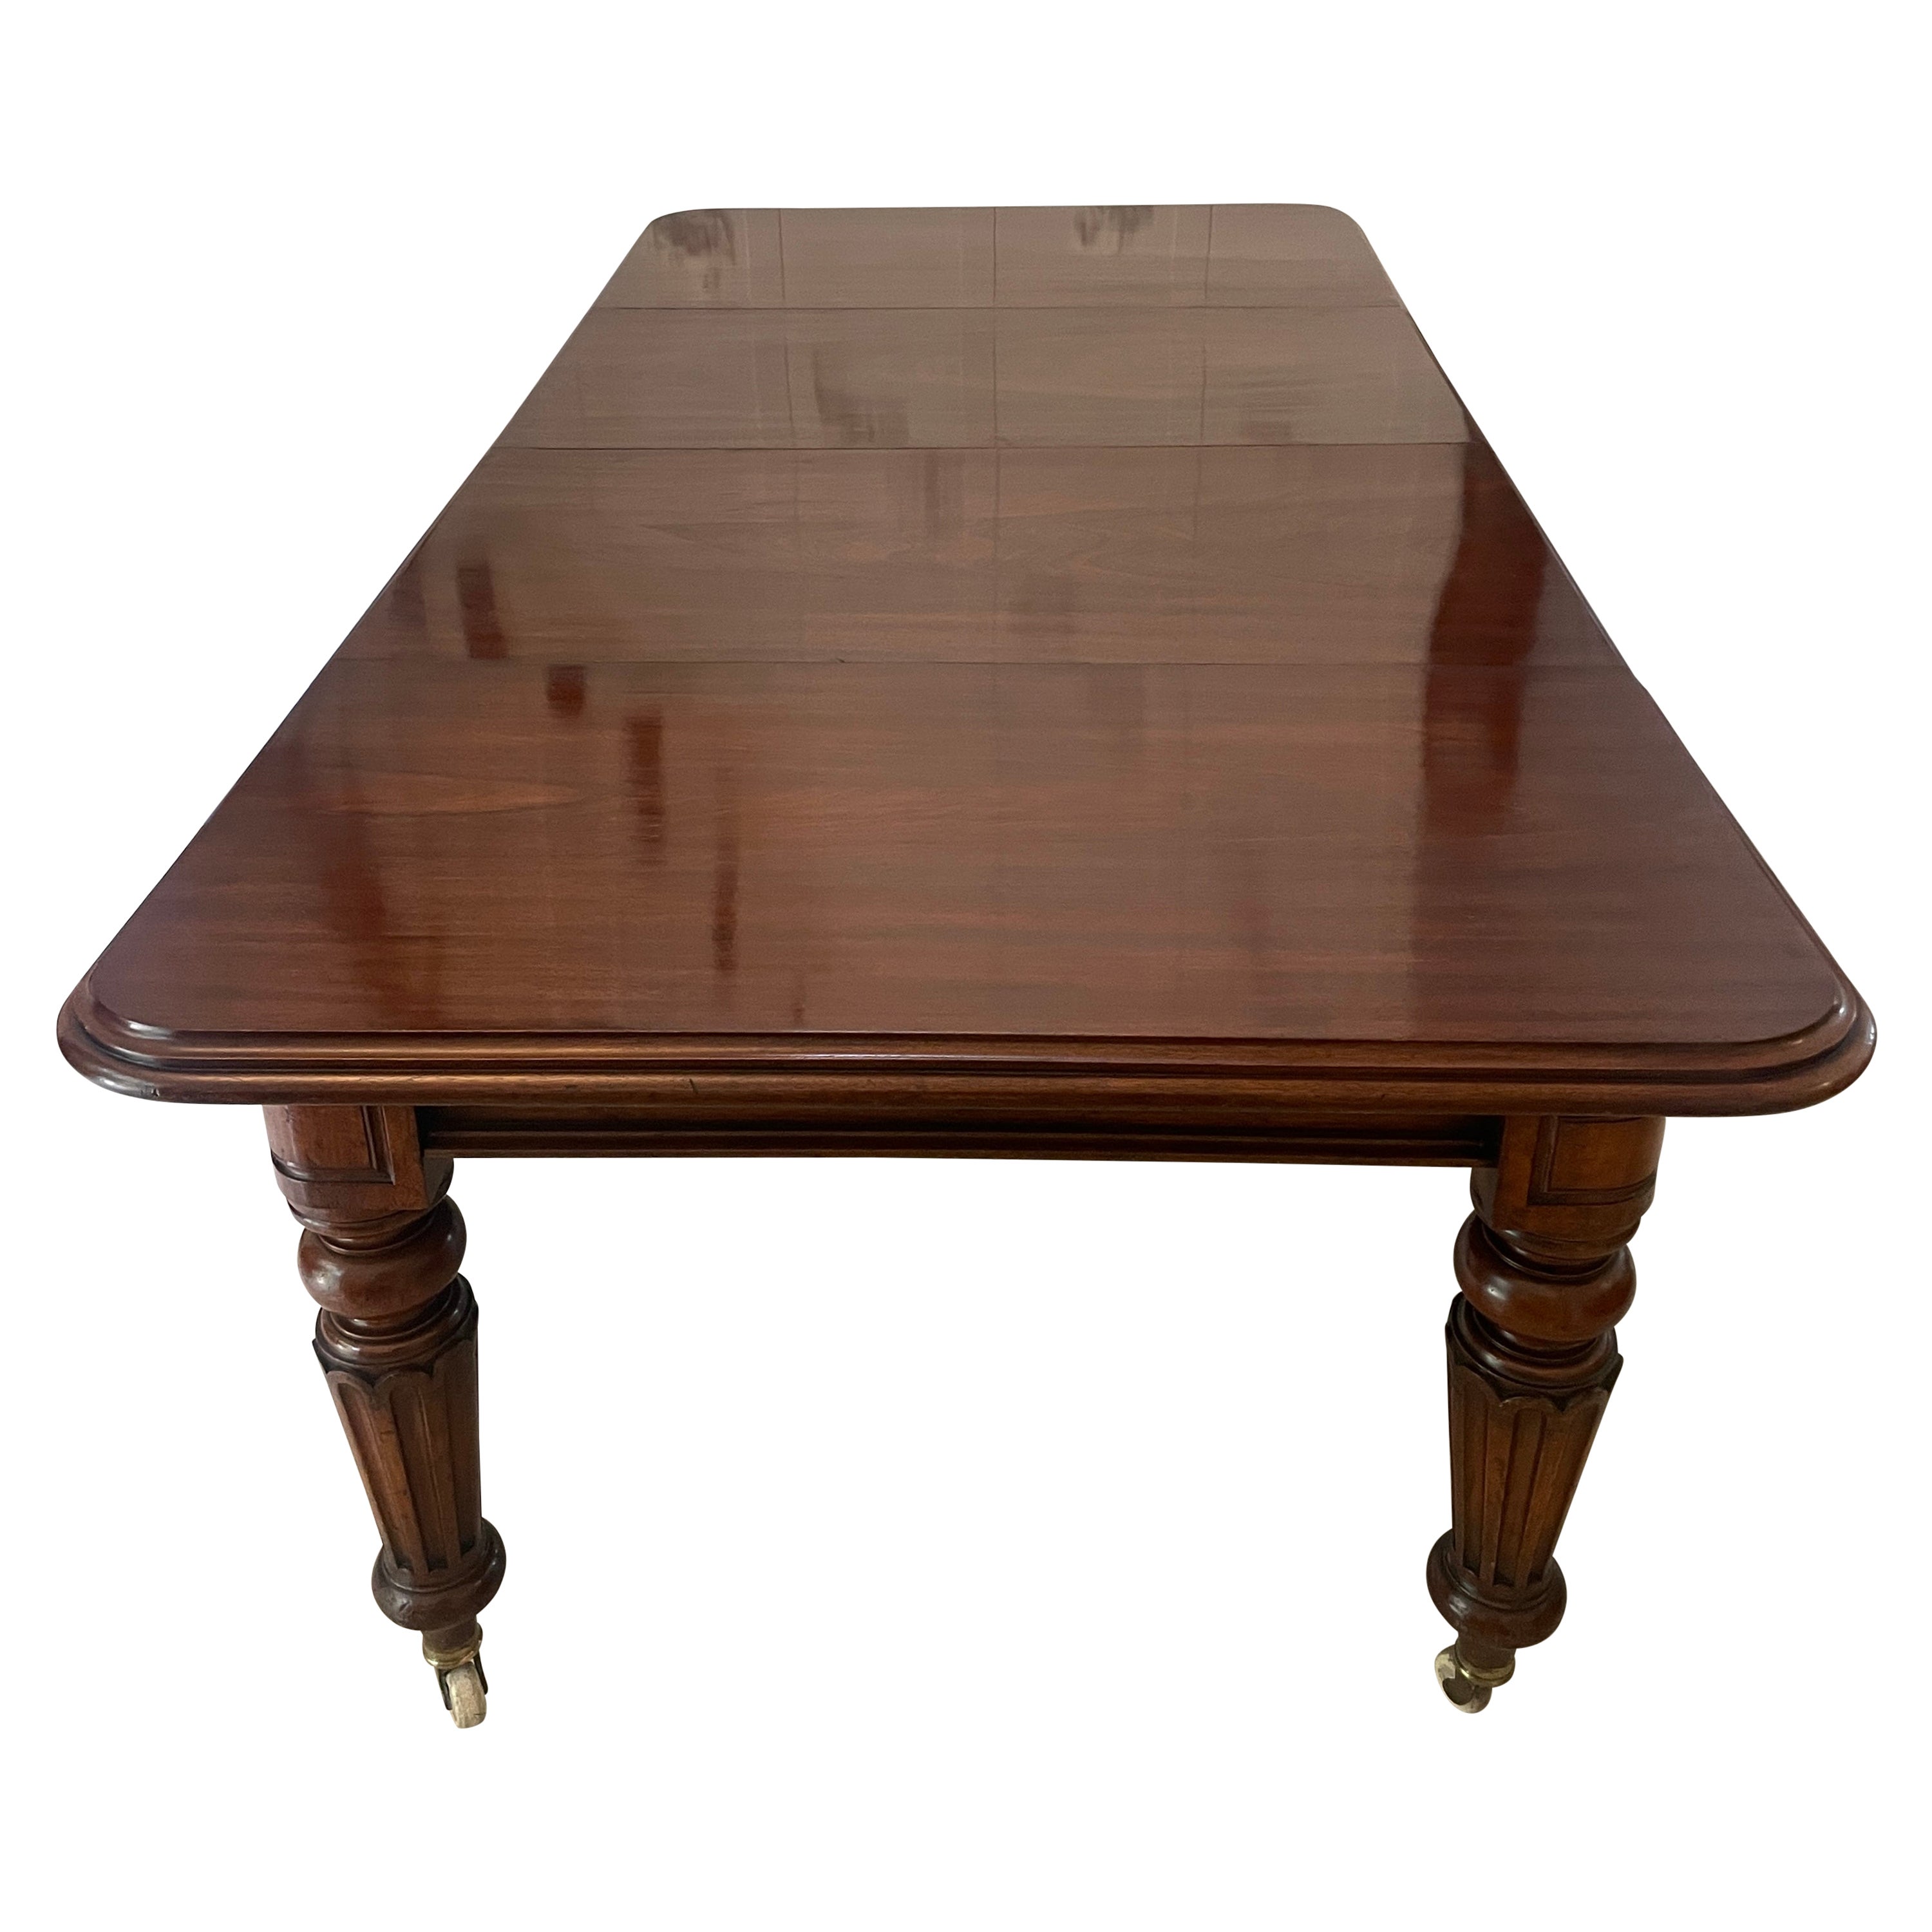 Quality 10 Seater Antique Victorian Figured Mahogany Extending Dining Table For Sale